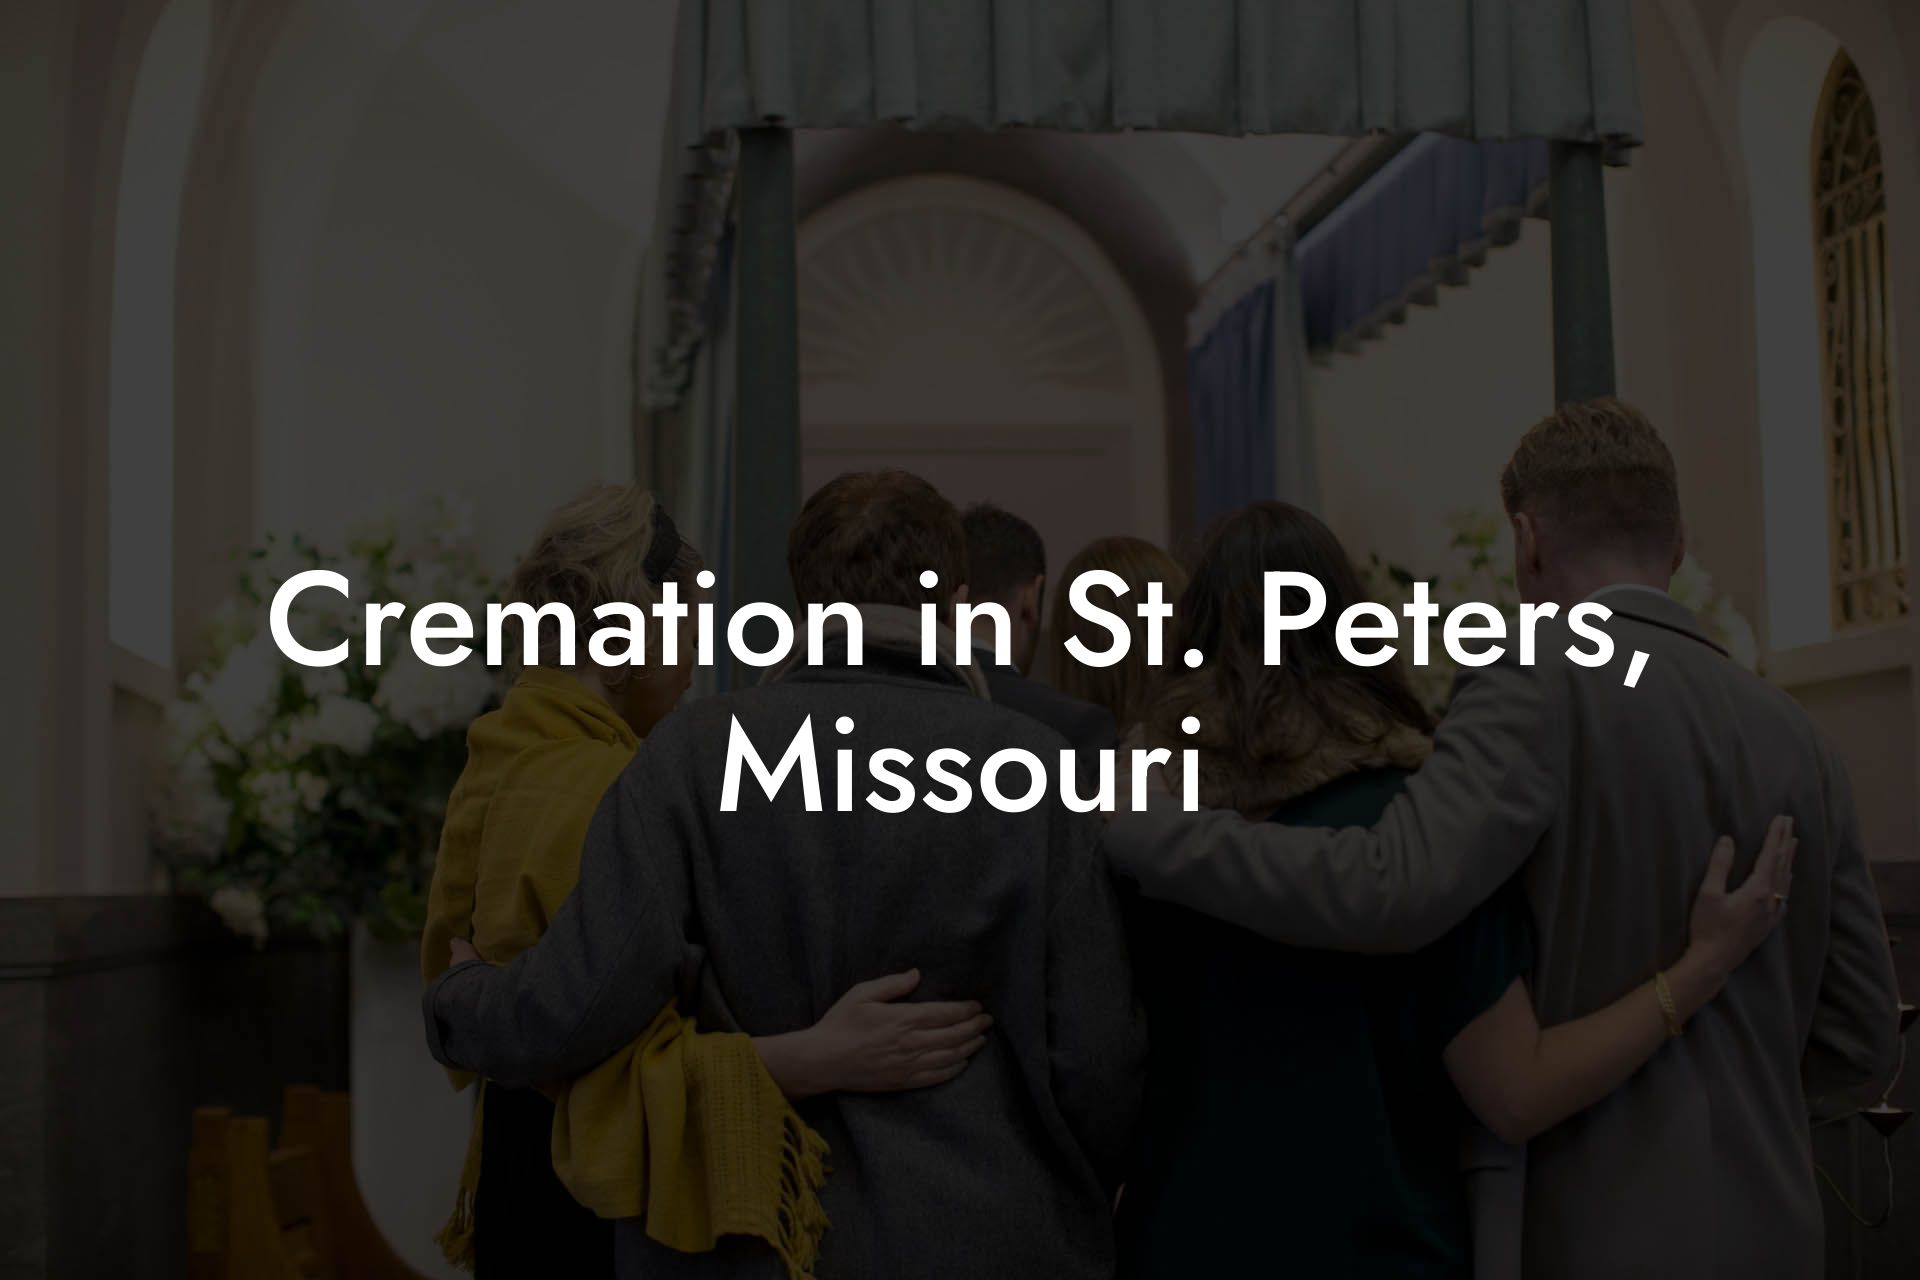 Cremation in St. Peters, Missouri